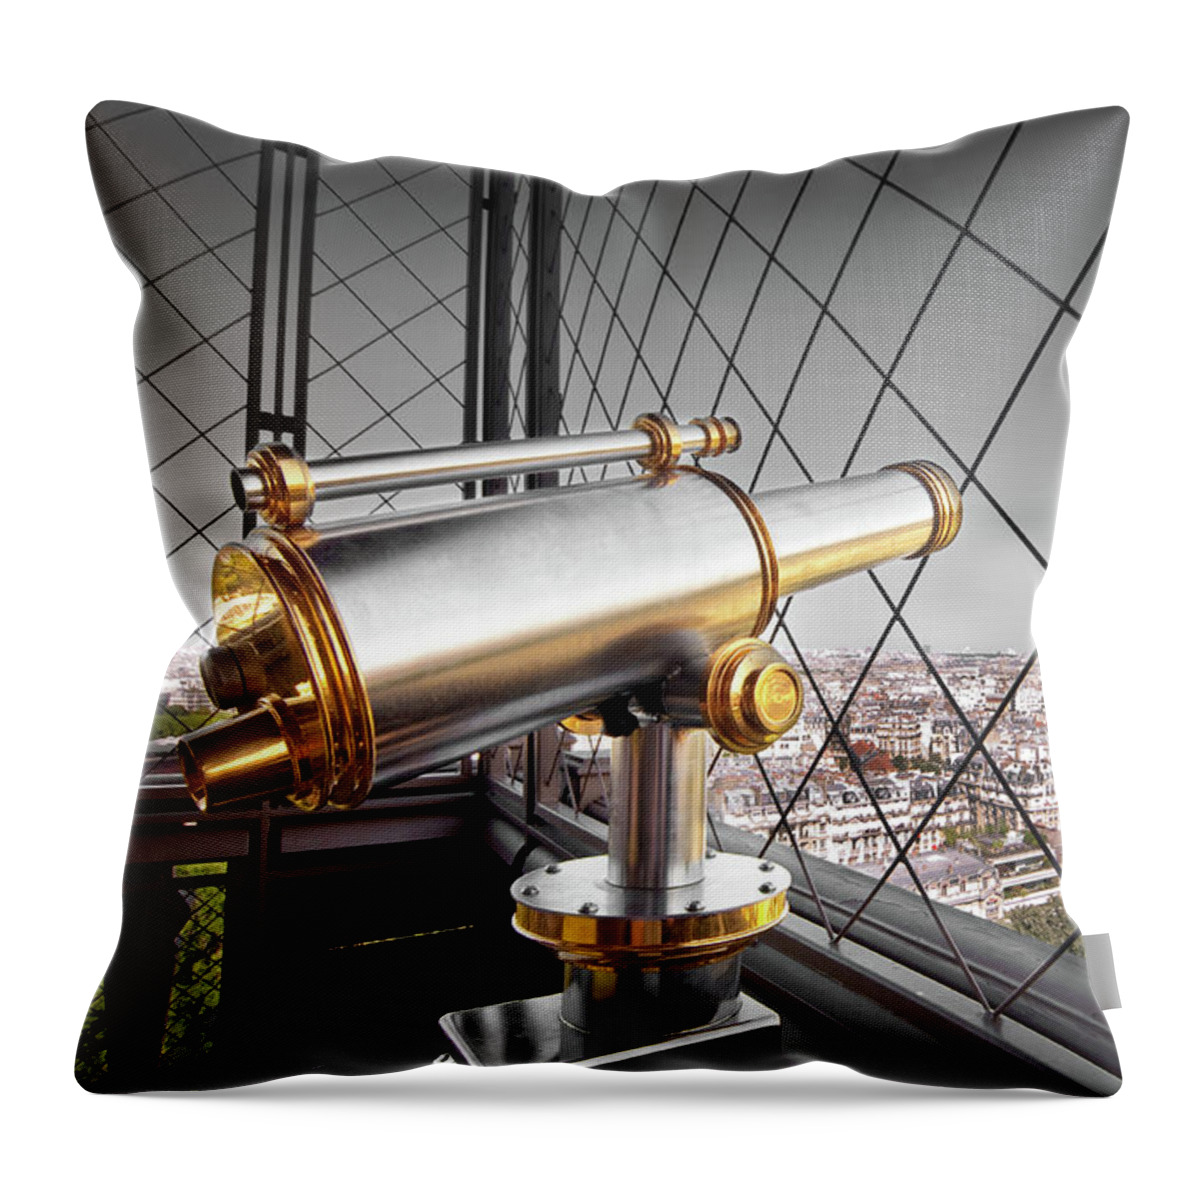 Eiffel Tower Throw Pillow featuring the photograph Observation telescope on the Eiffel tower in Paris by Delphimages Paris Photography